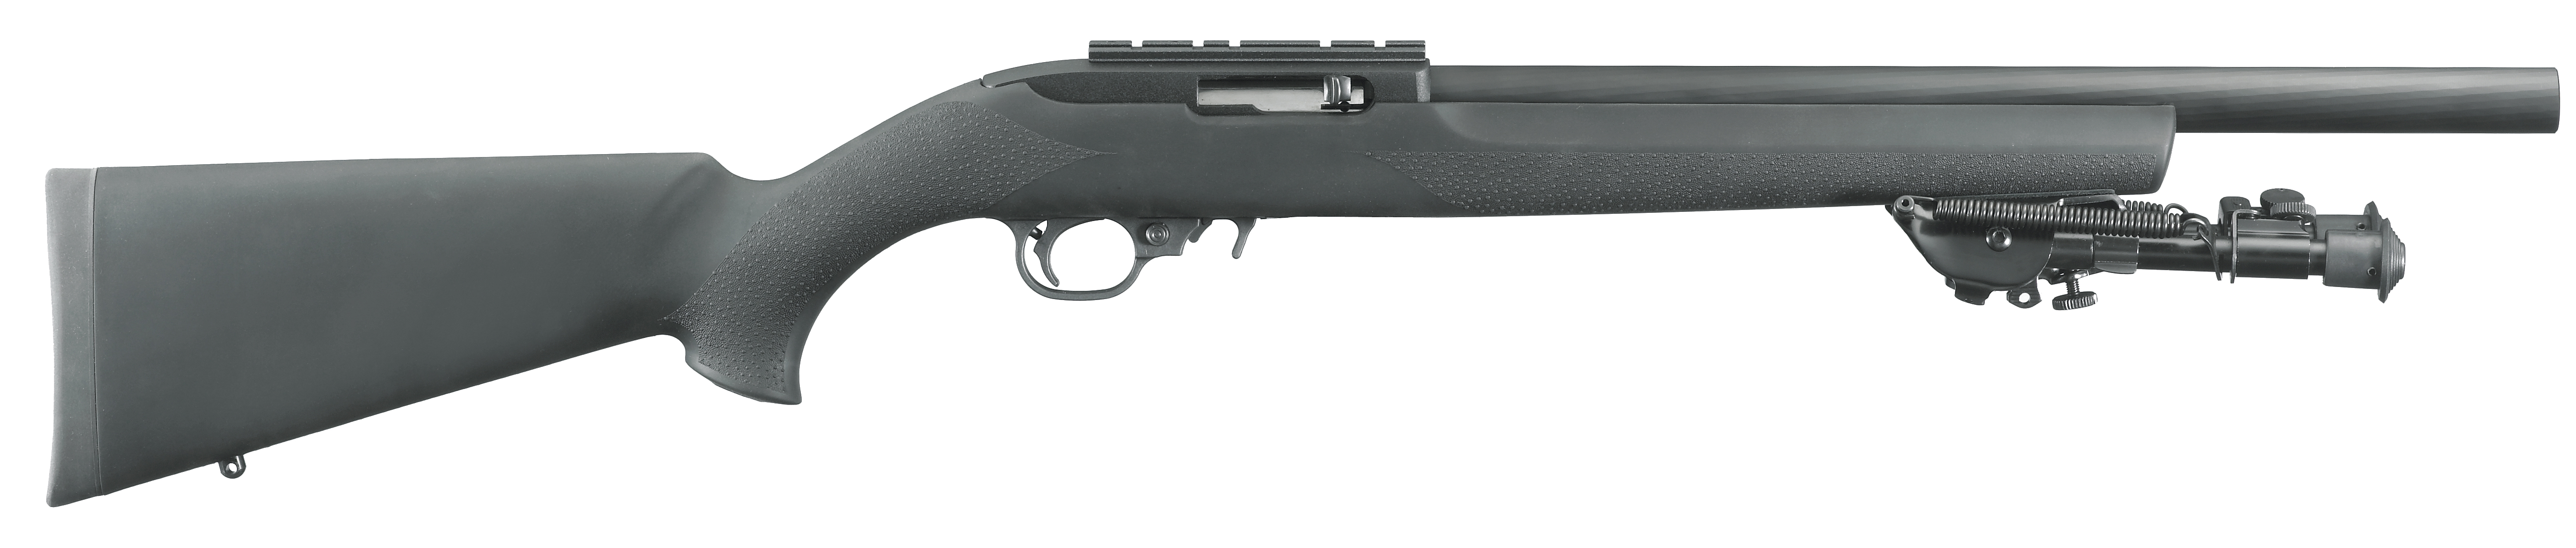 Weapons Ruger 10 22 Rifle 5346x1138